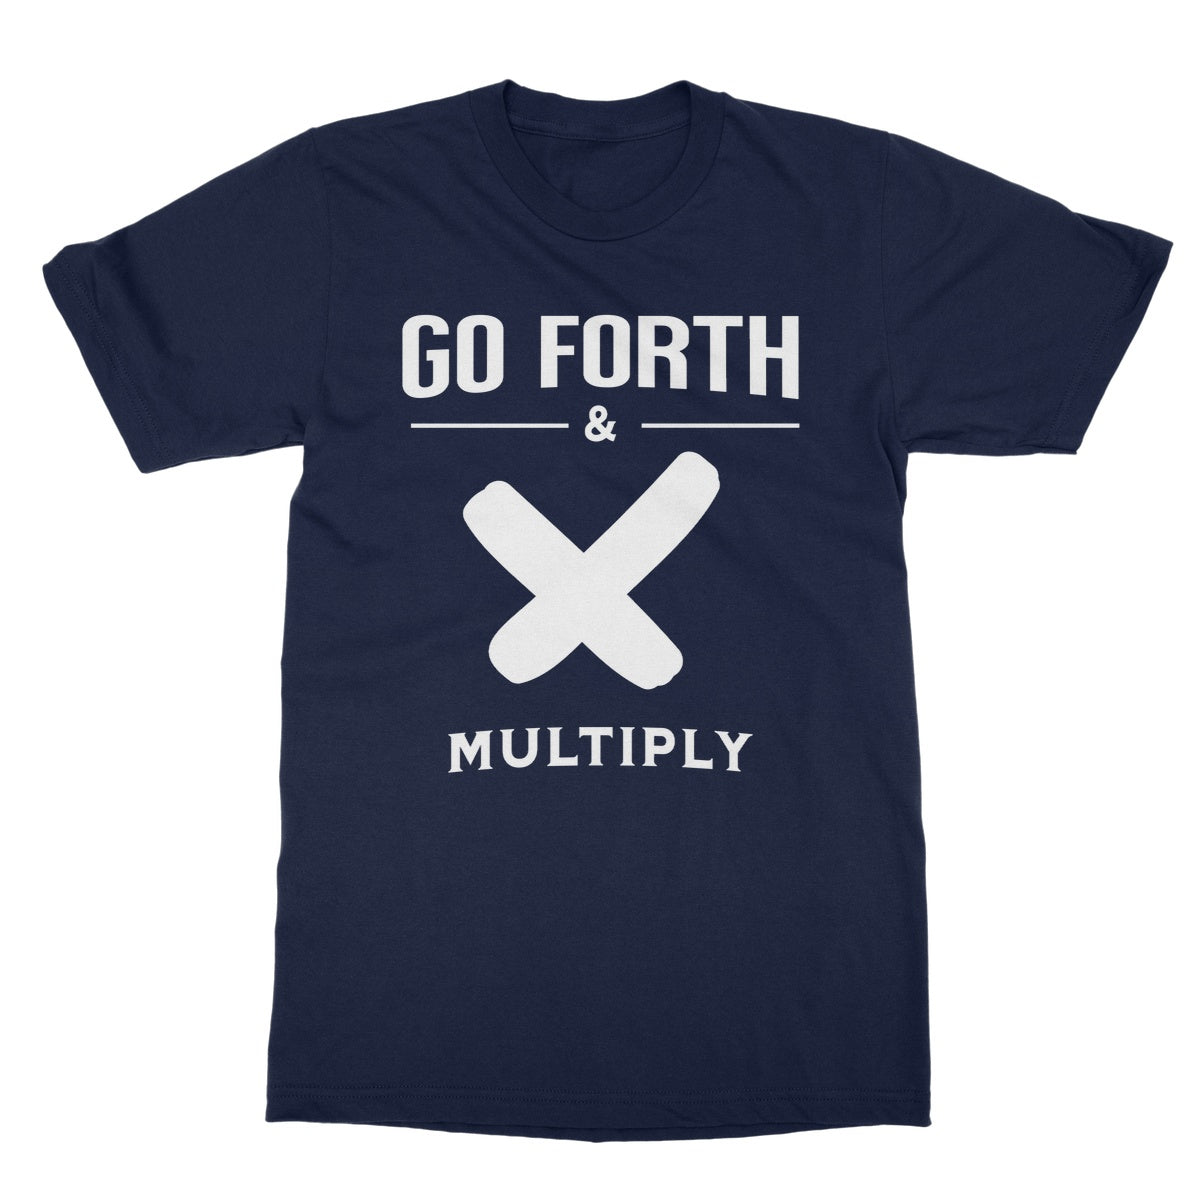 go forth and multiply t shirt navy